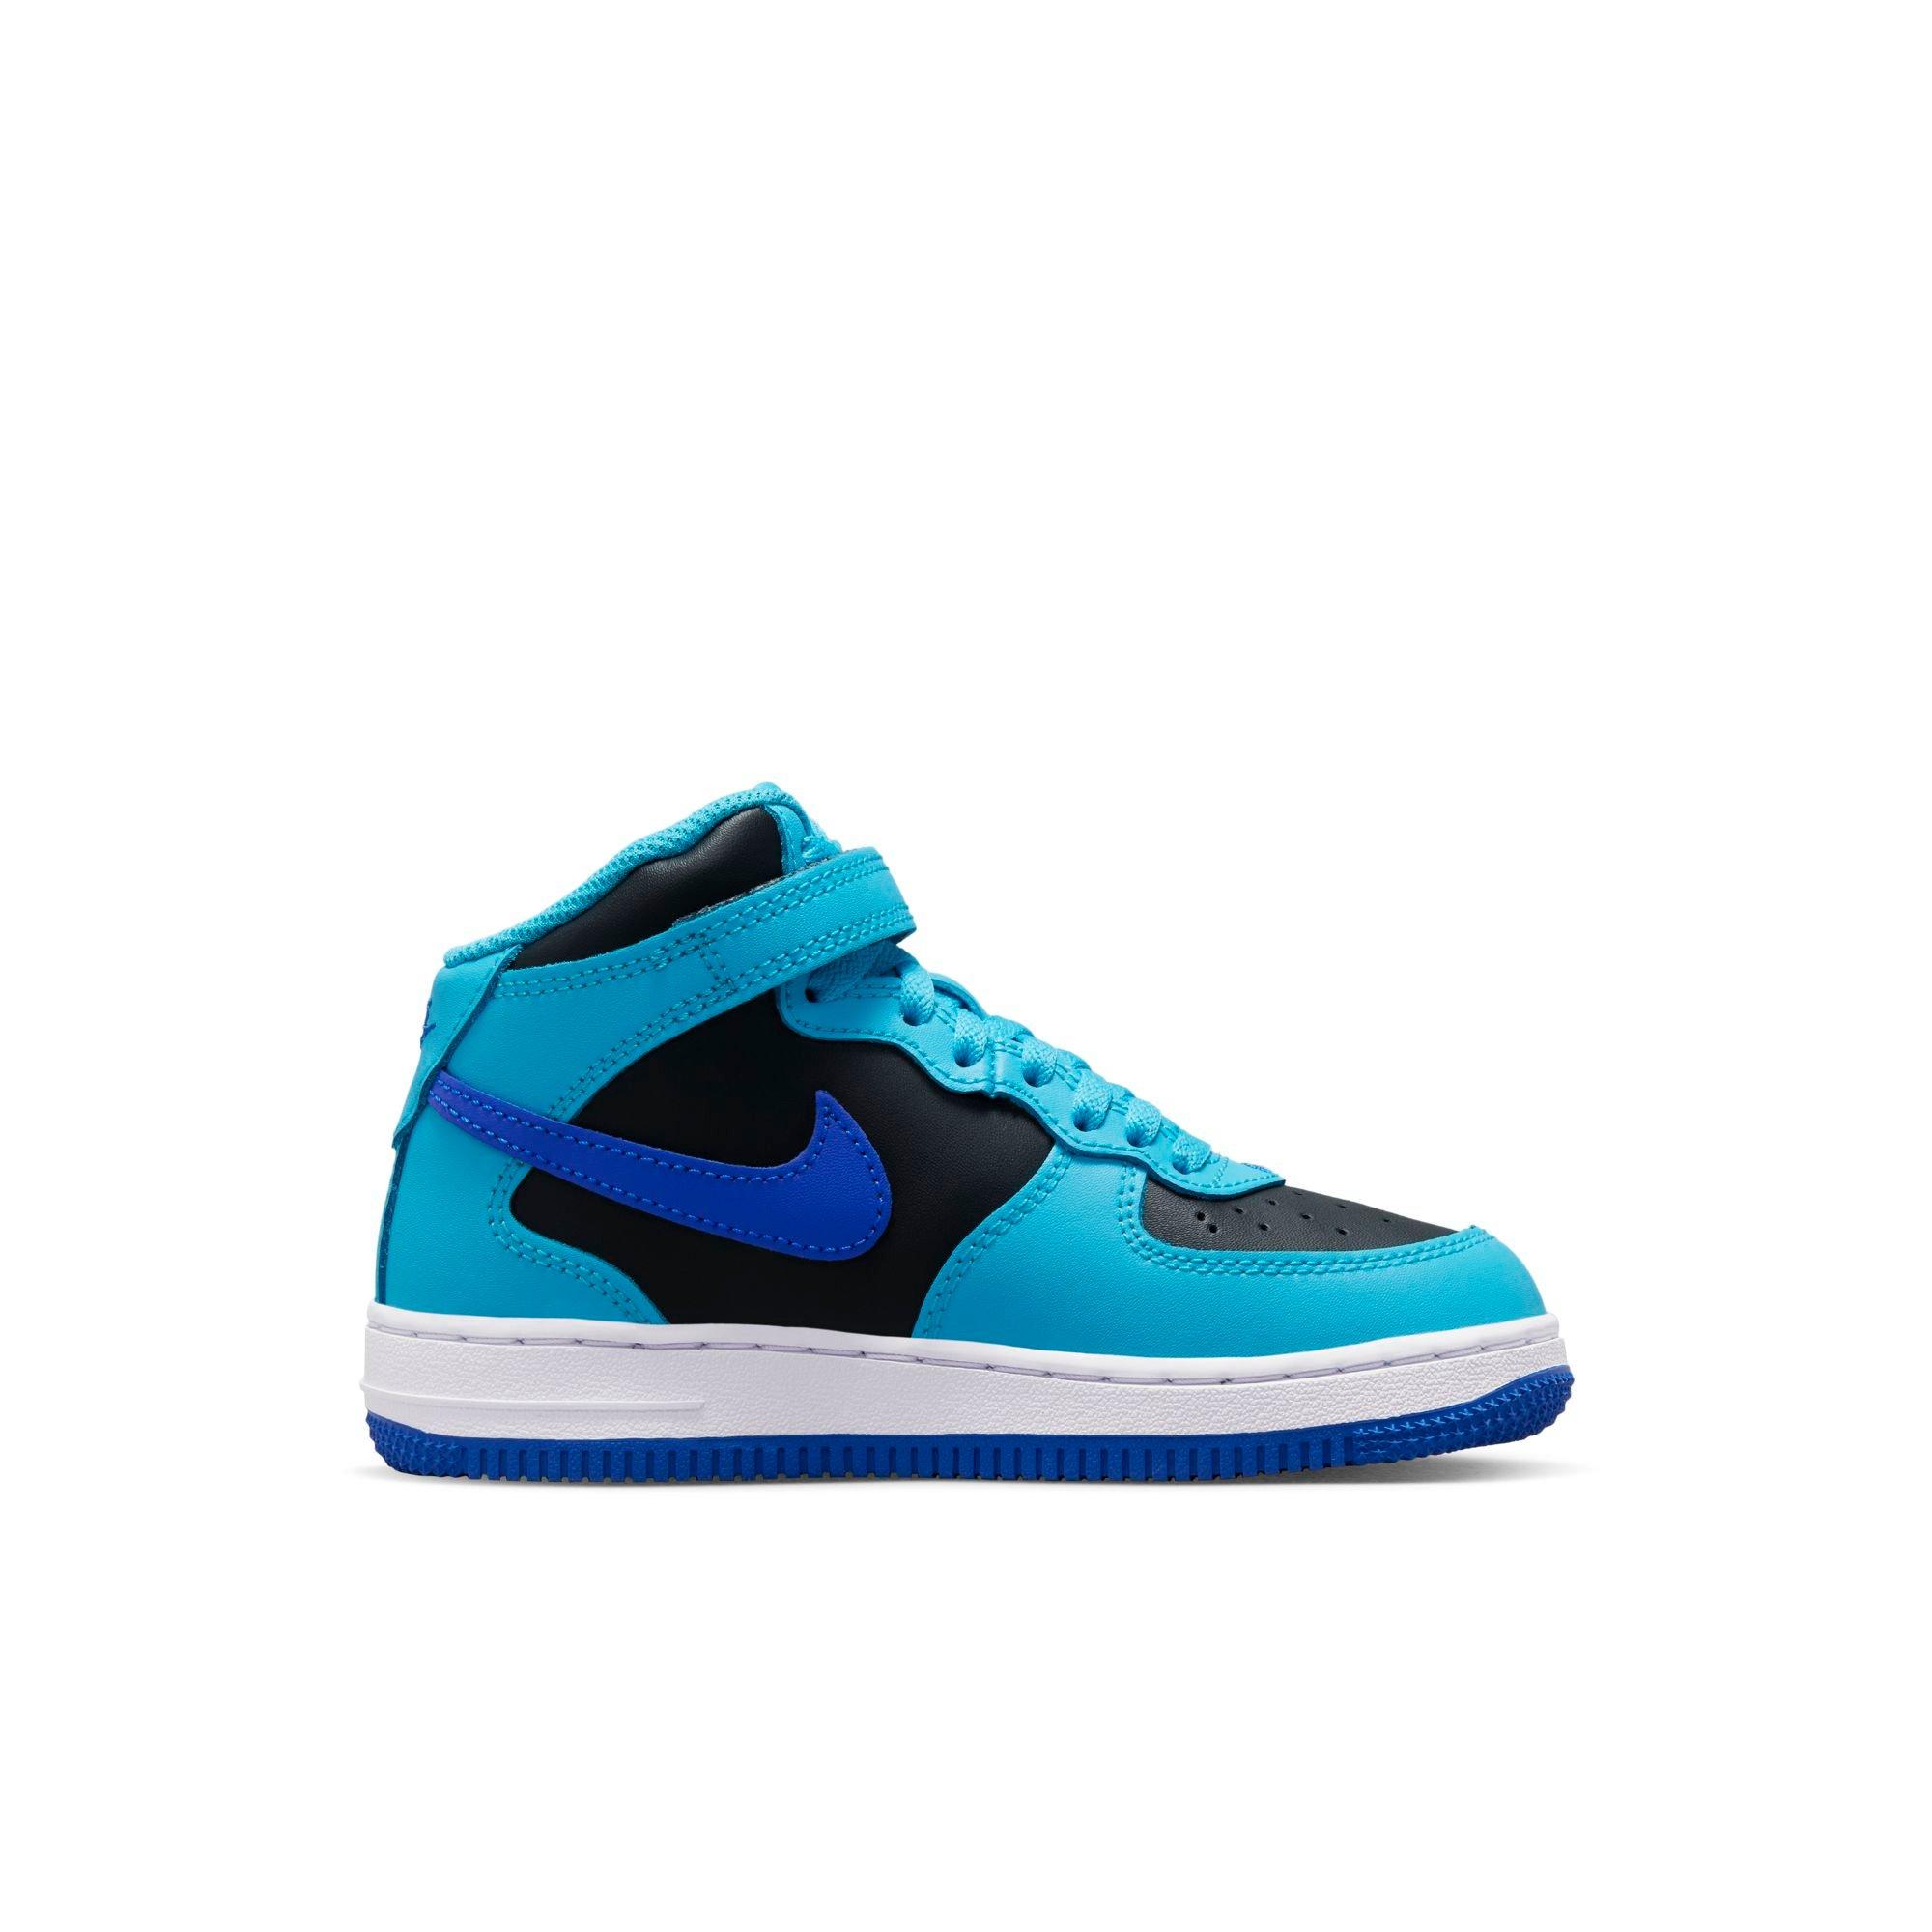 Nike Force 1 Mid Le Little Kids' Shoes in Blue, Size: 2.5Y | DH2934-400